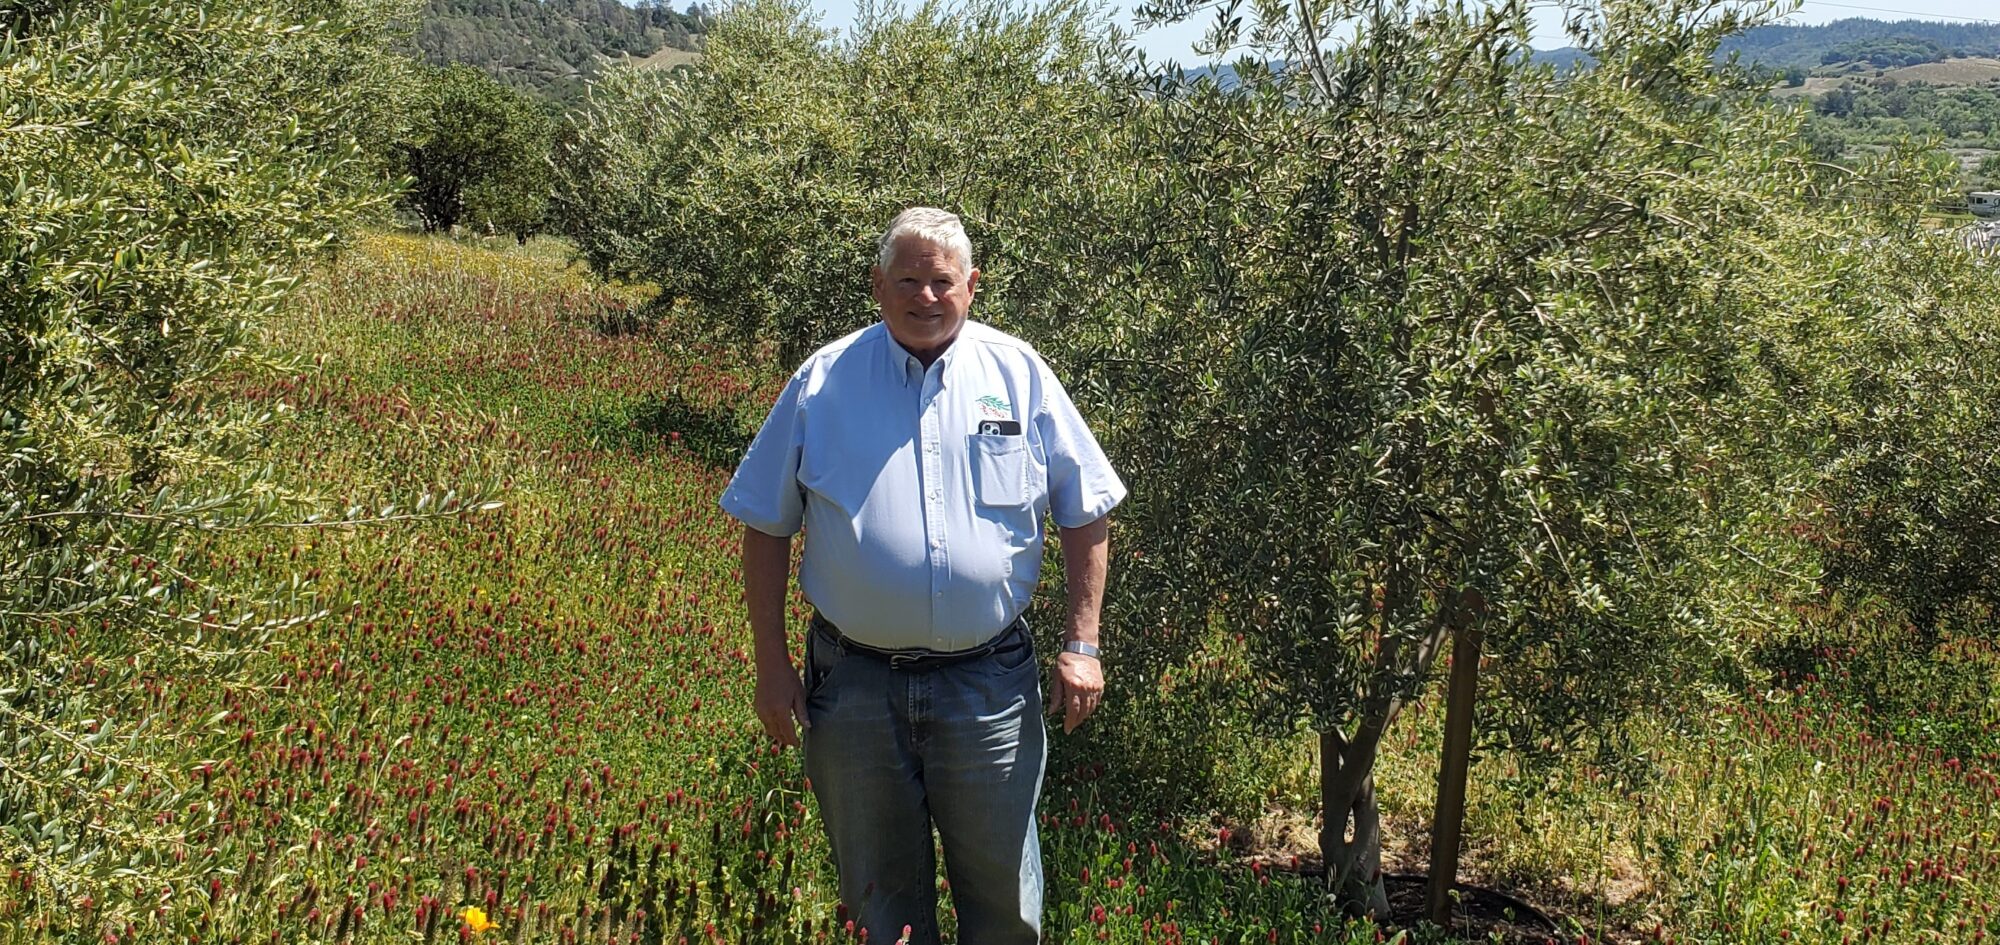 Geoff, one of the founders of Showa Farm, walks in his olive orchard where crimson clover covers the ground between the green olive trees